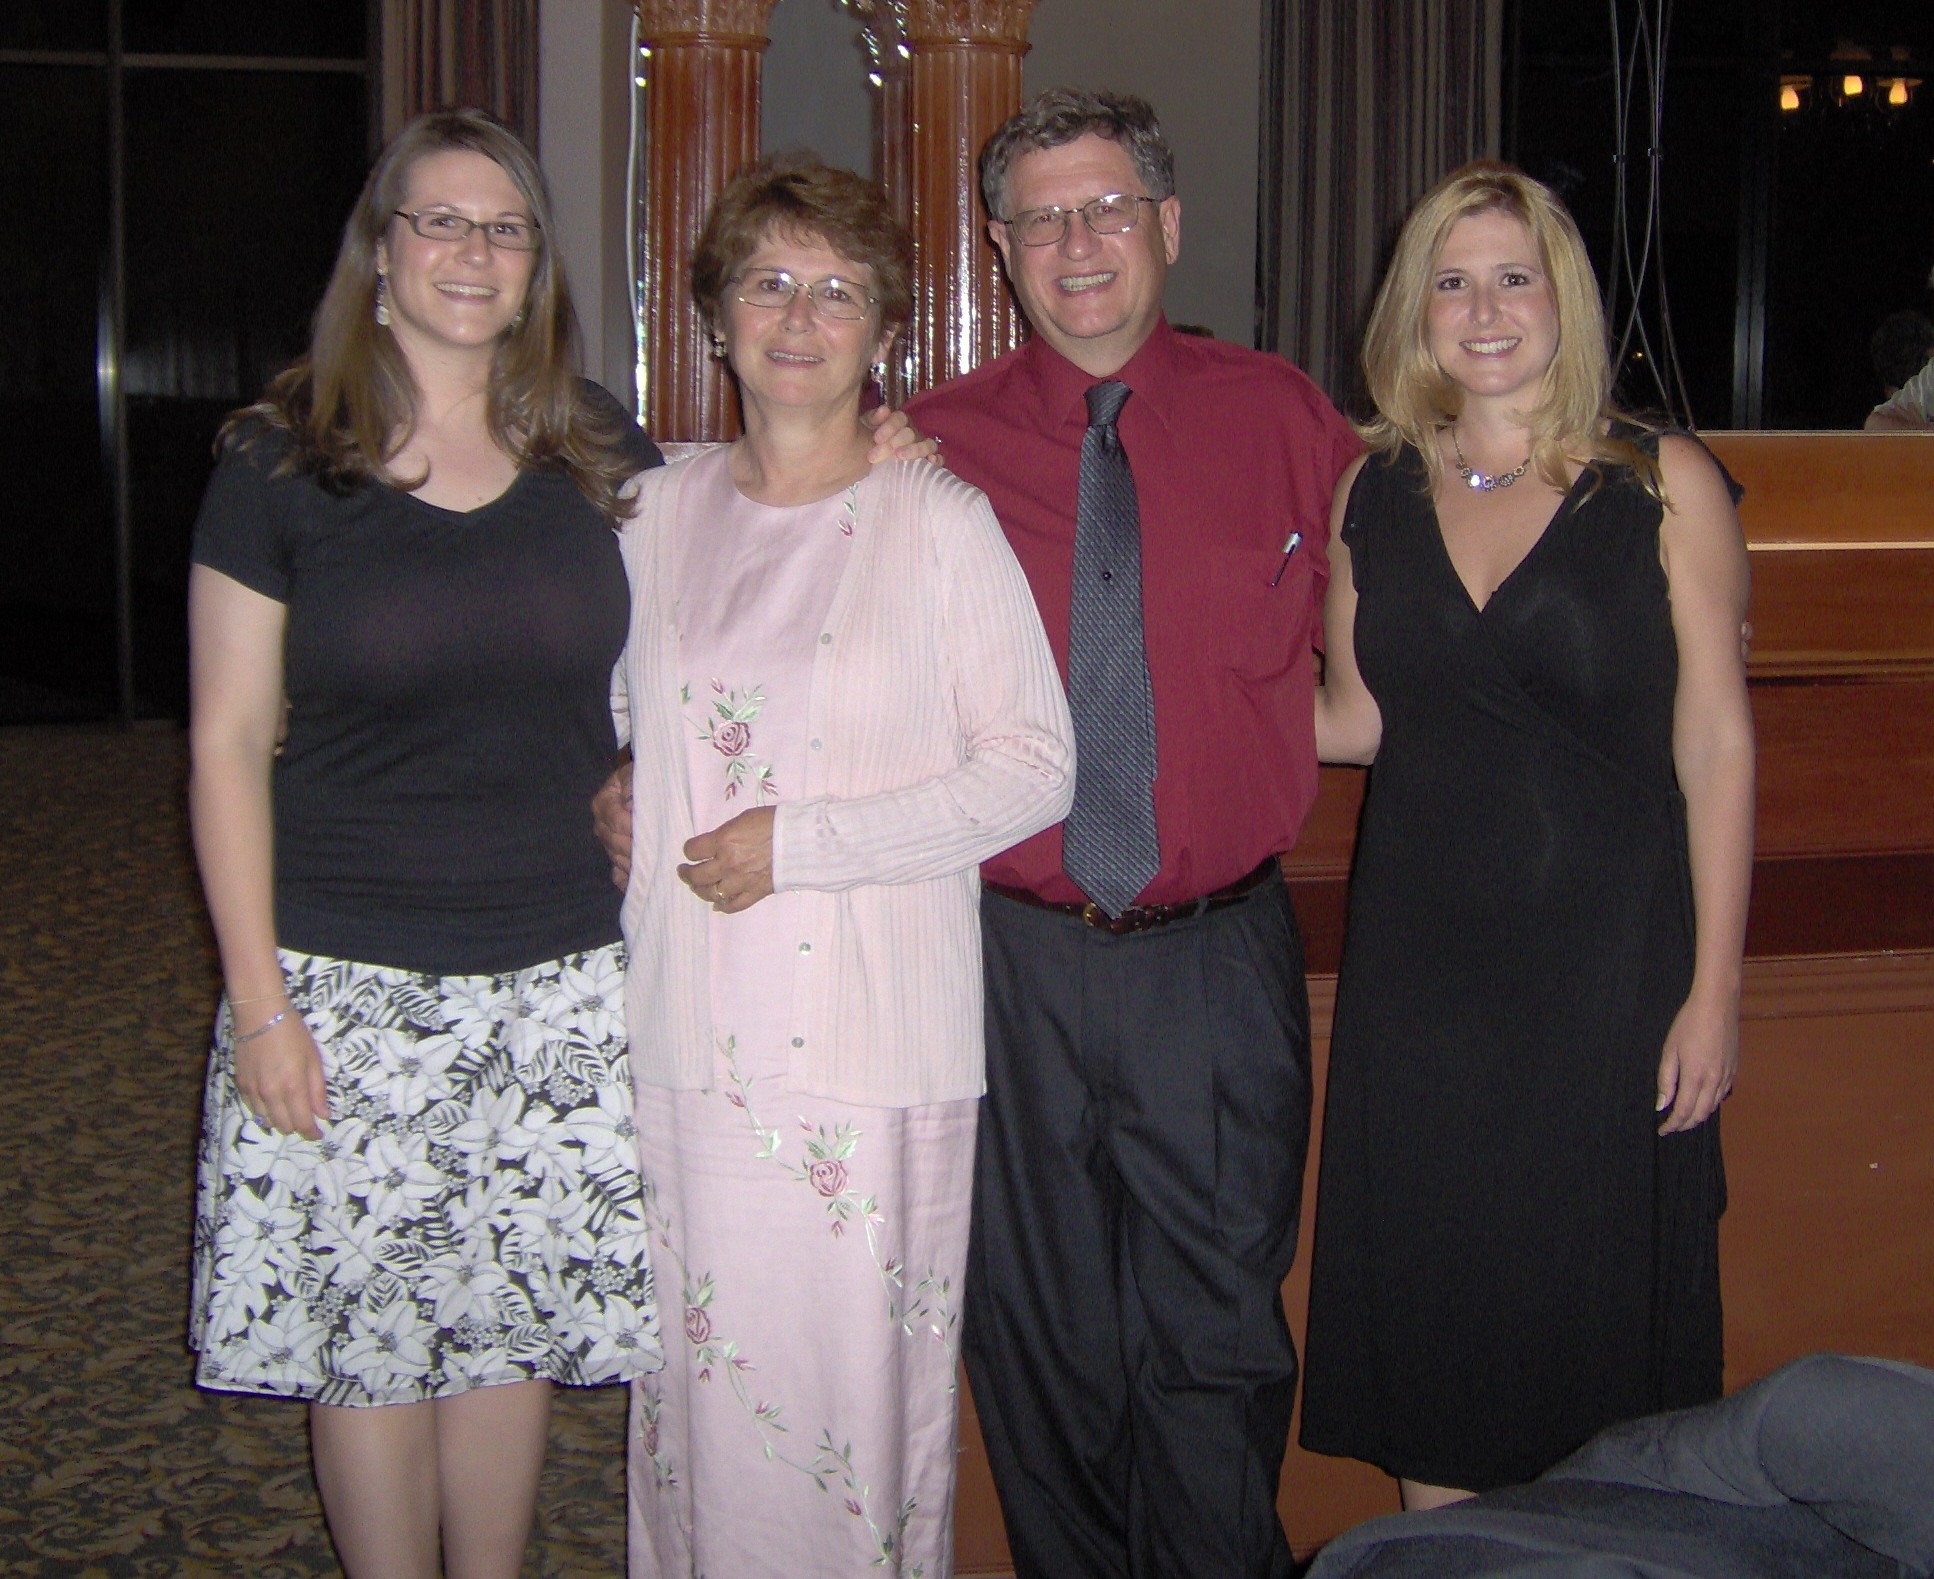 2007 OFHS meeting in Charlottesville, VA - The Douglas Owsley family